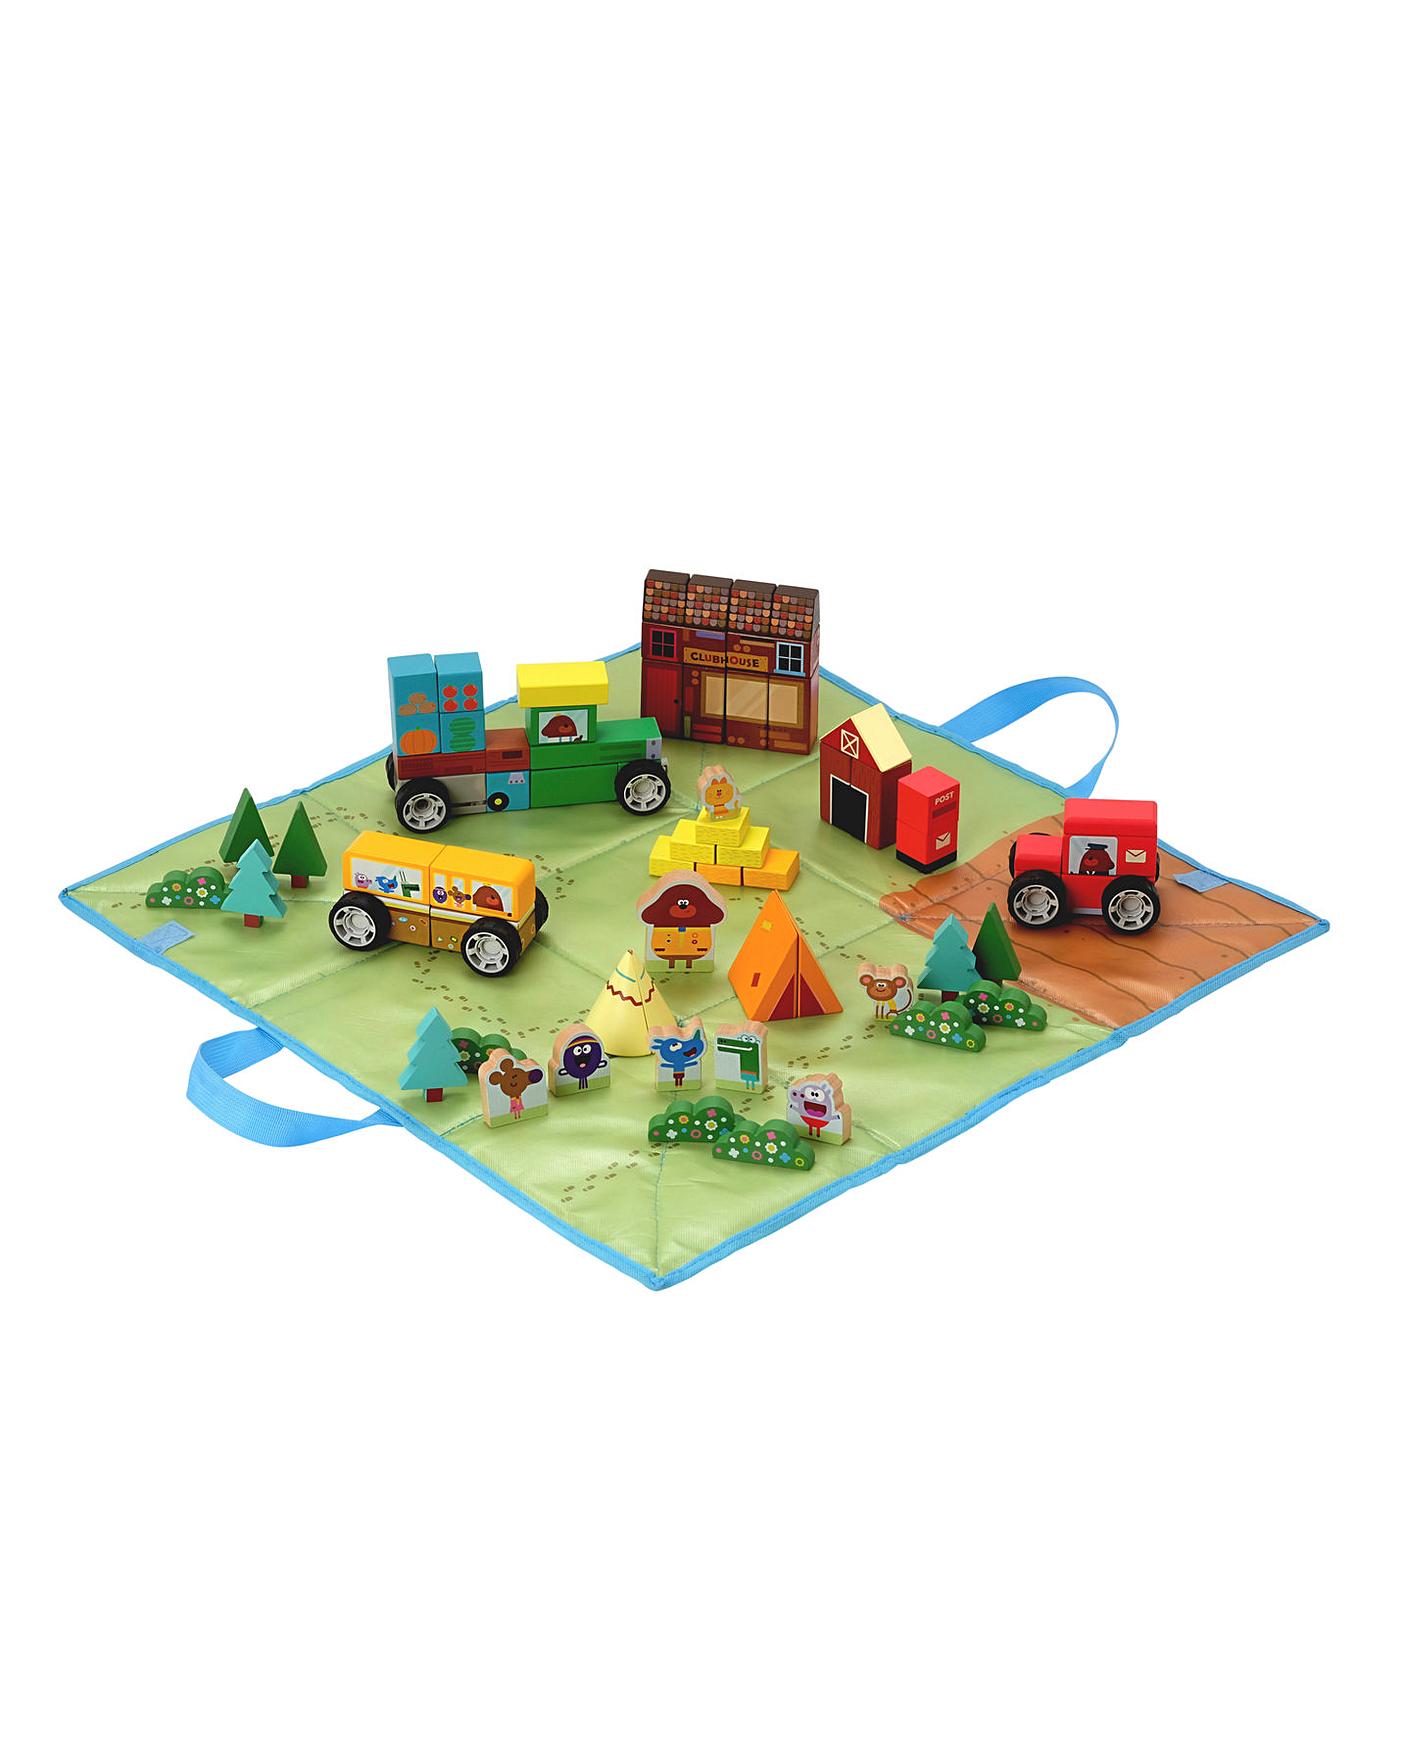 duggee clubhouse toy